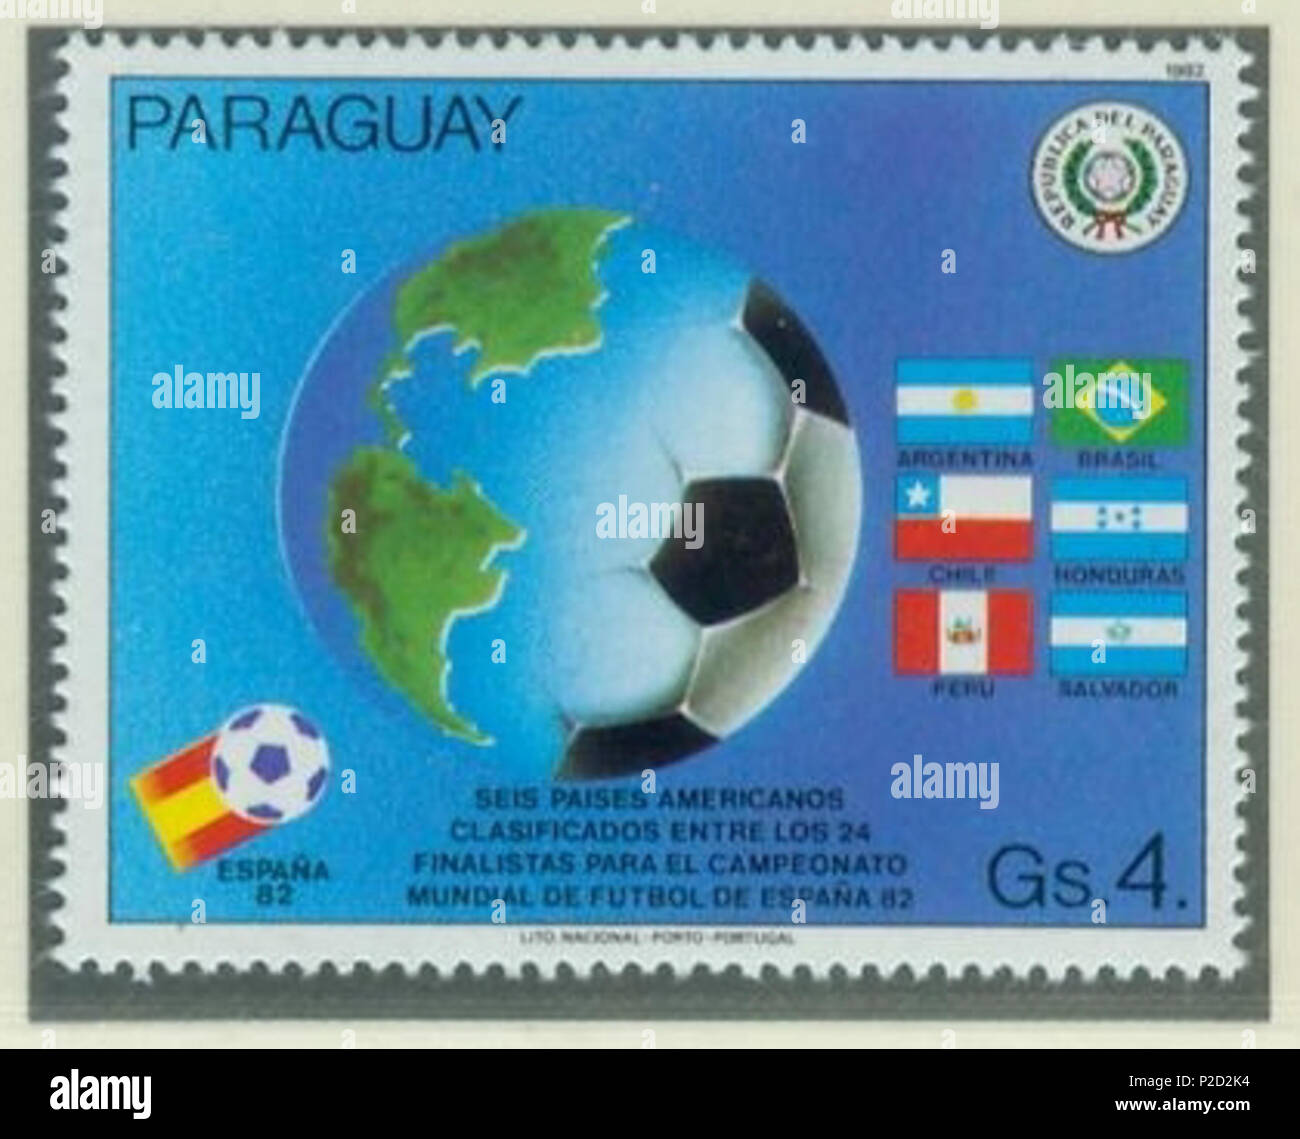 . Deutsch:    Briefmarke aus Paraguay zur Fußball-Weltmeisterschaft 1982 in Spanien English:    Stamp of Paraguay of the 1982 FIFA World Cup in Spain . 1982. uploaded by R-E-AL (talk | contribs | Gallery)  (German ) 1 1982-paraguay-wm-spain-1-ball Stock Photo